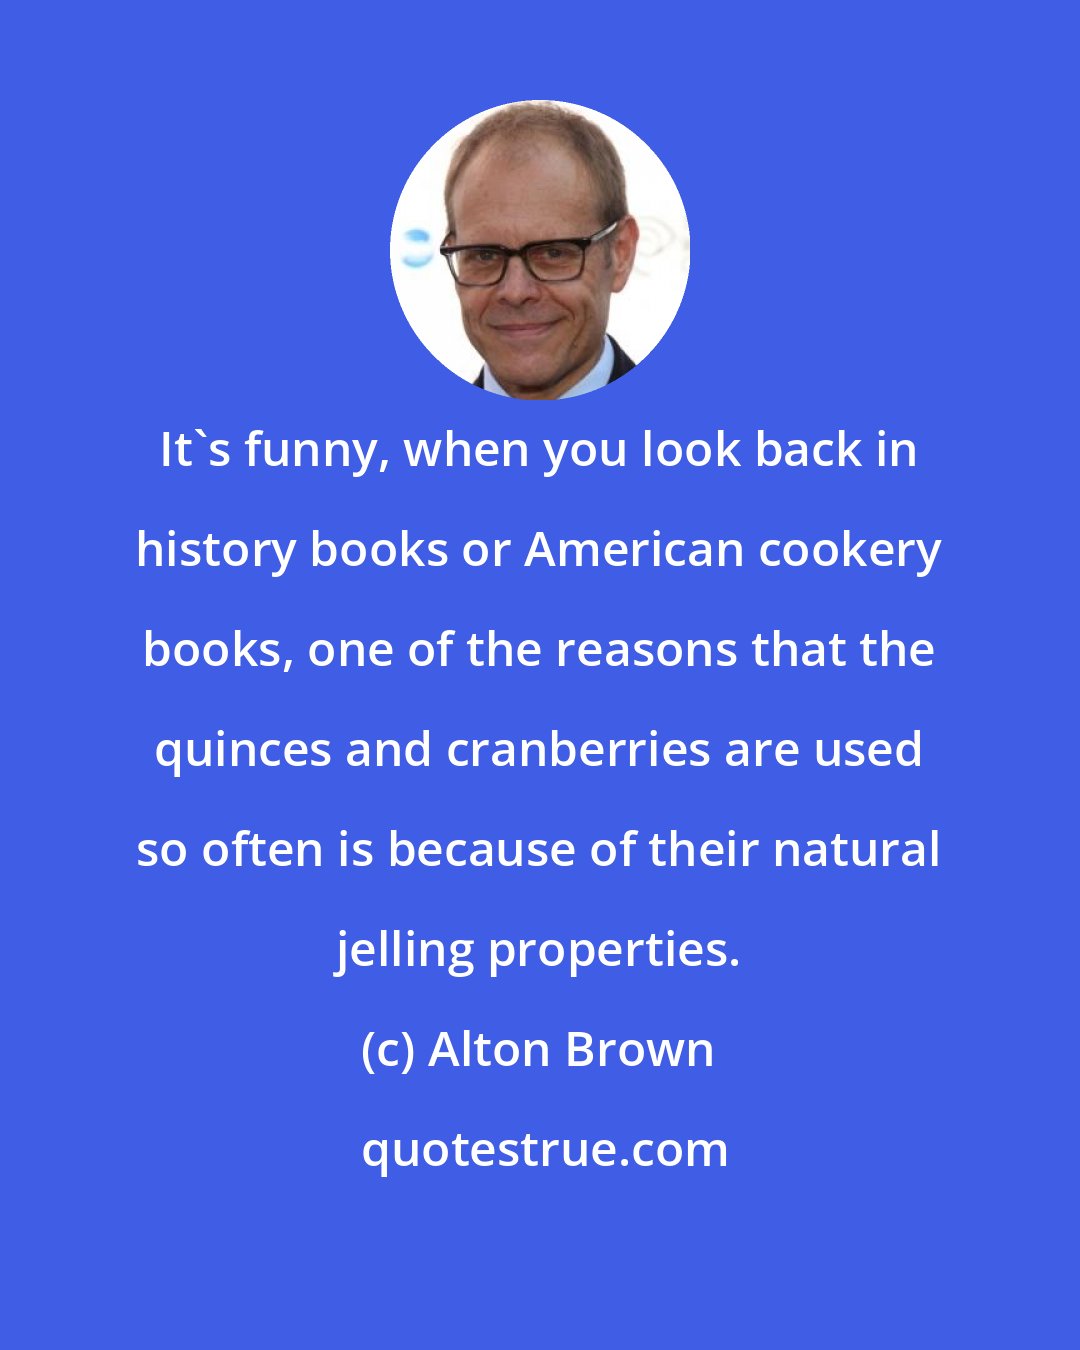 Alton Brown: It's funny, when you look back in history books or American cookery books, one of the reasons that the quinces and cranberries are used so often is because of their natural jelling properties.